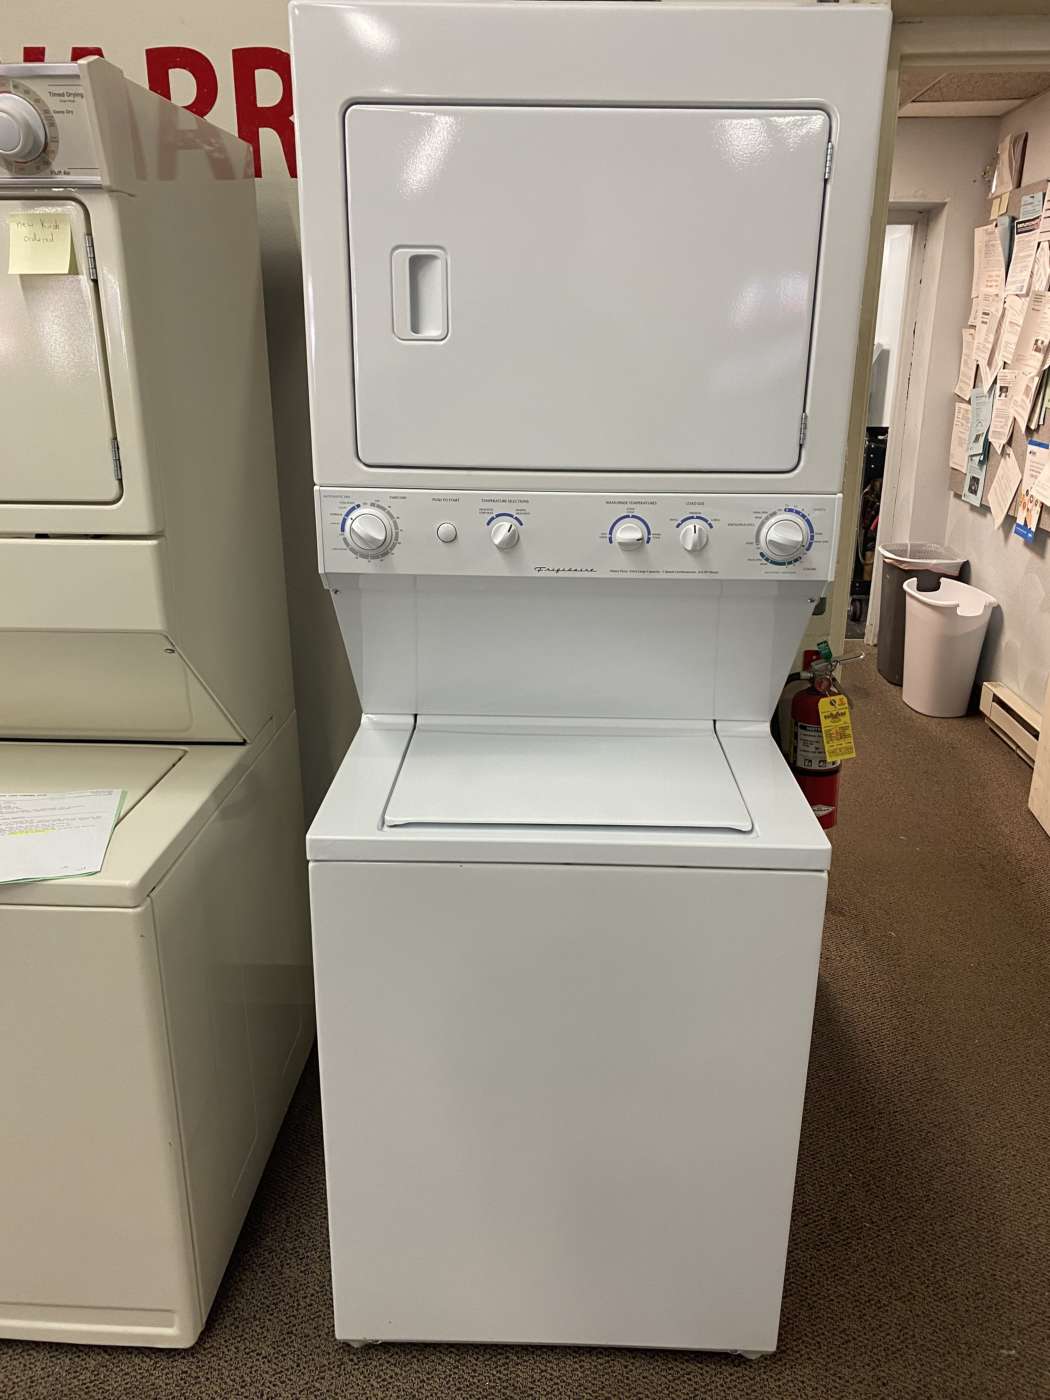 Reconditioned FRIGIDAIRE Laundry-Center / 2.7 Cu. Ft. Top-Load Washer & 5.7 Cu. Ft. Electric Dryer – White